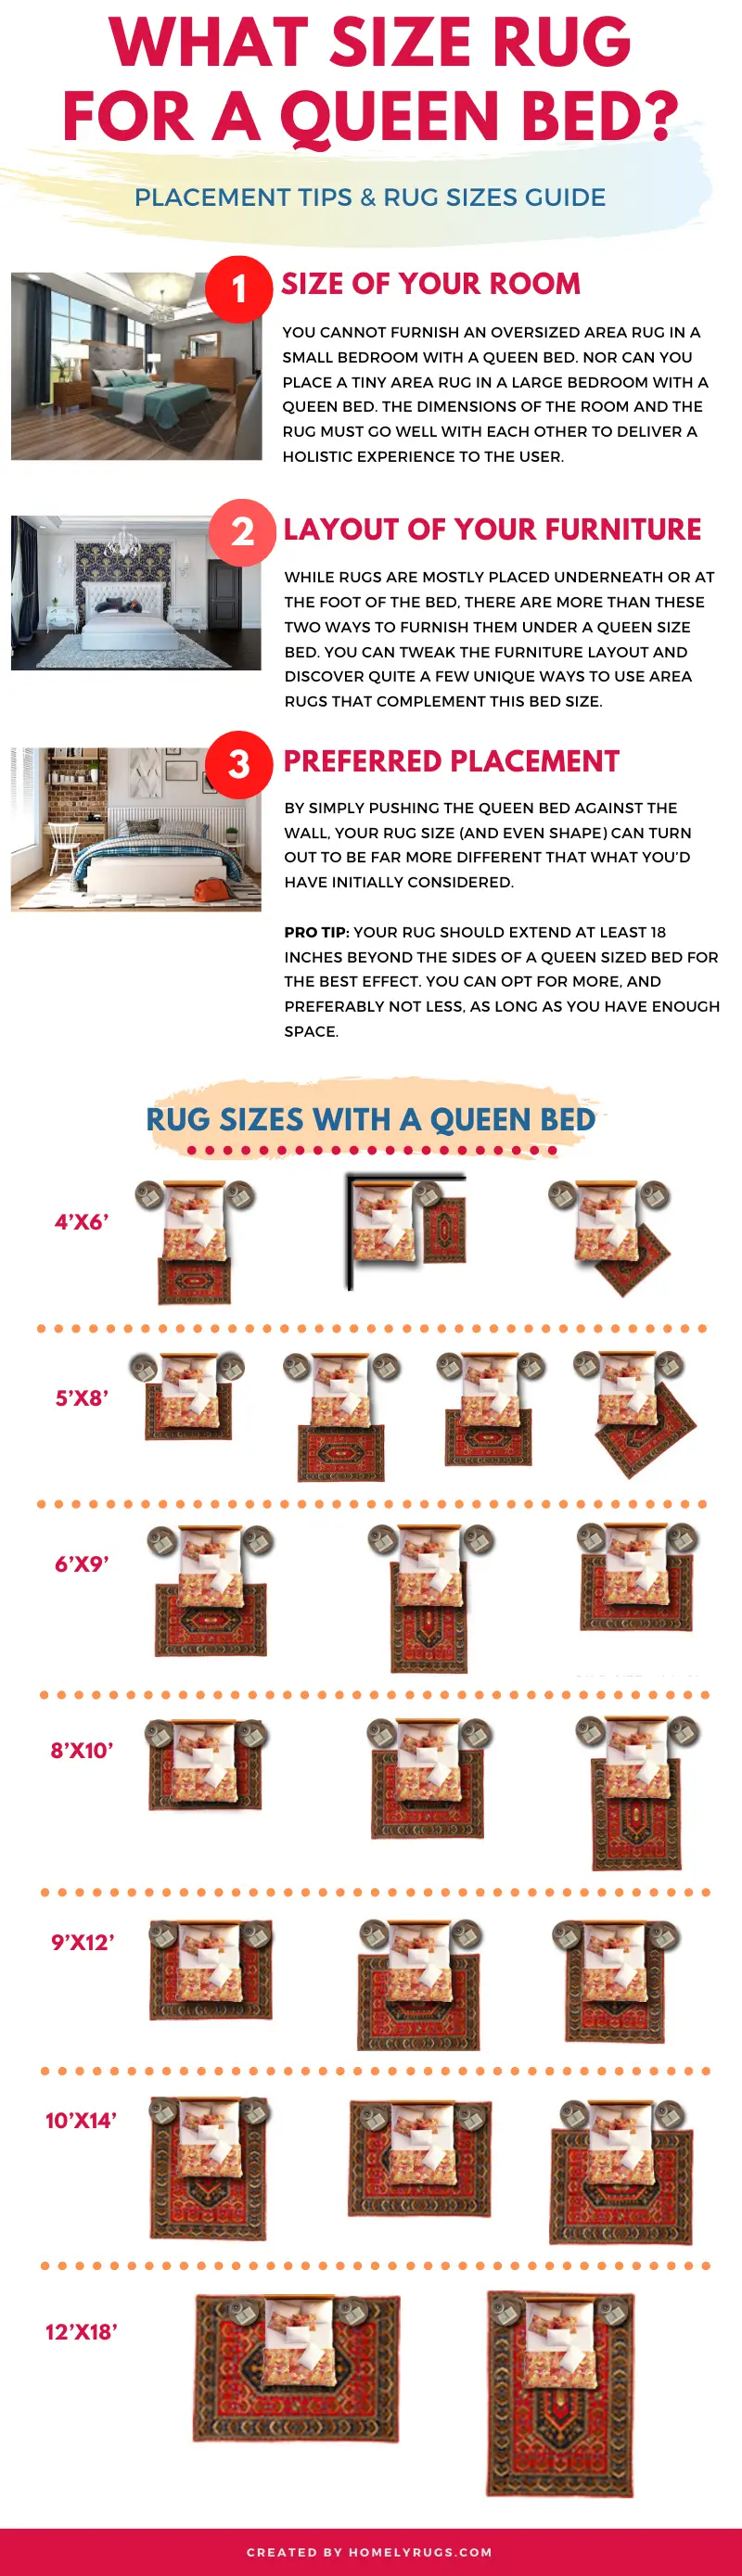 What Size Rug for Queen Bed Infographic